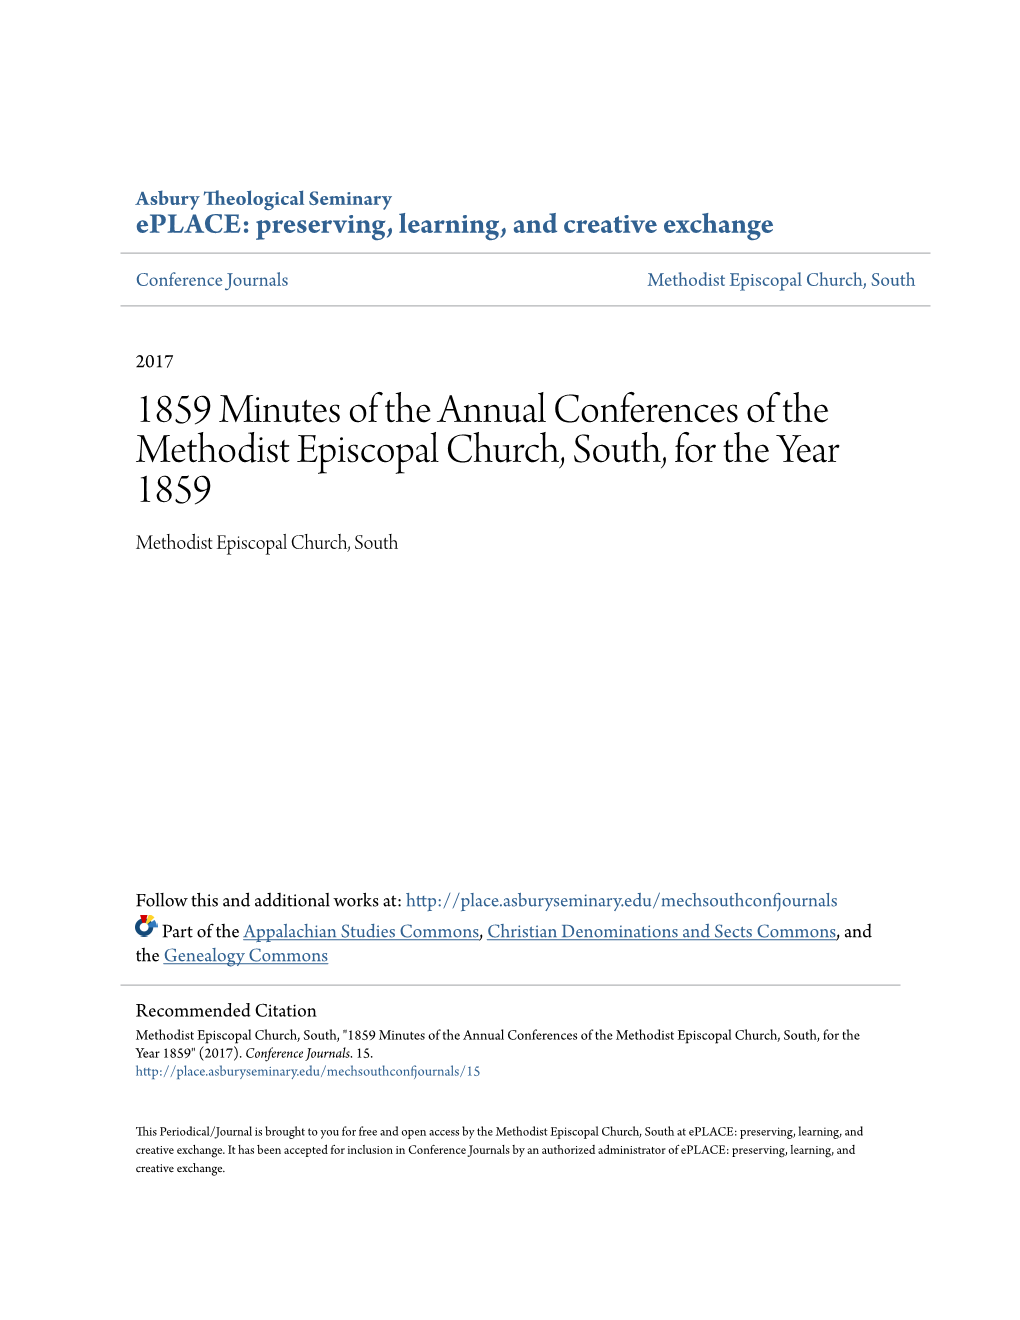 1859 Minutes of the Annual Conferences of the Methodist Episcopal Church, South, for the Year 1859 Methodist Episcopal Church, South